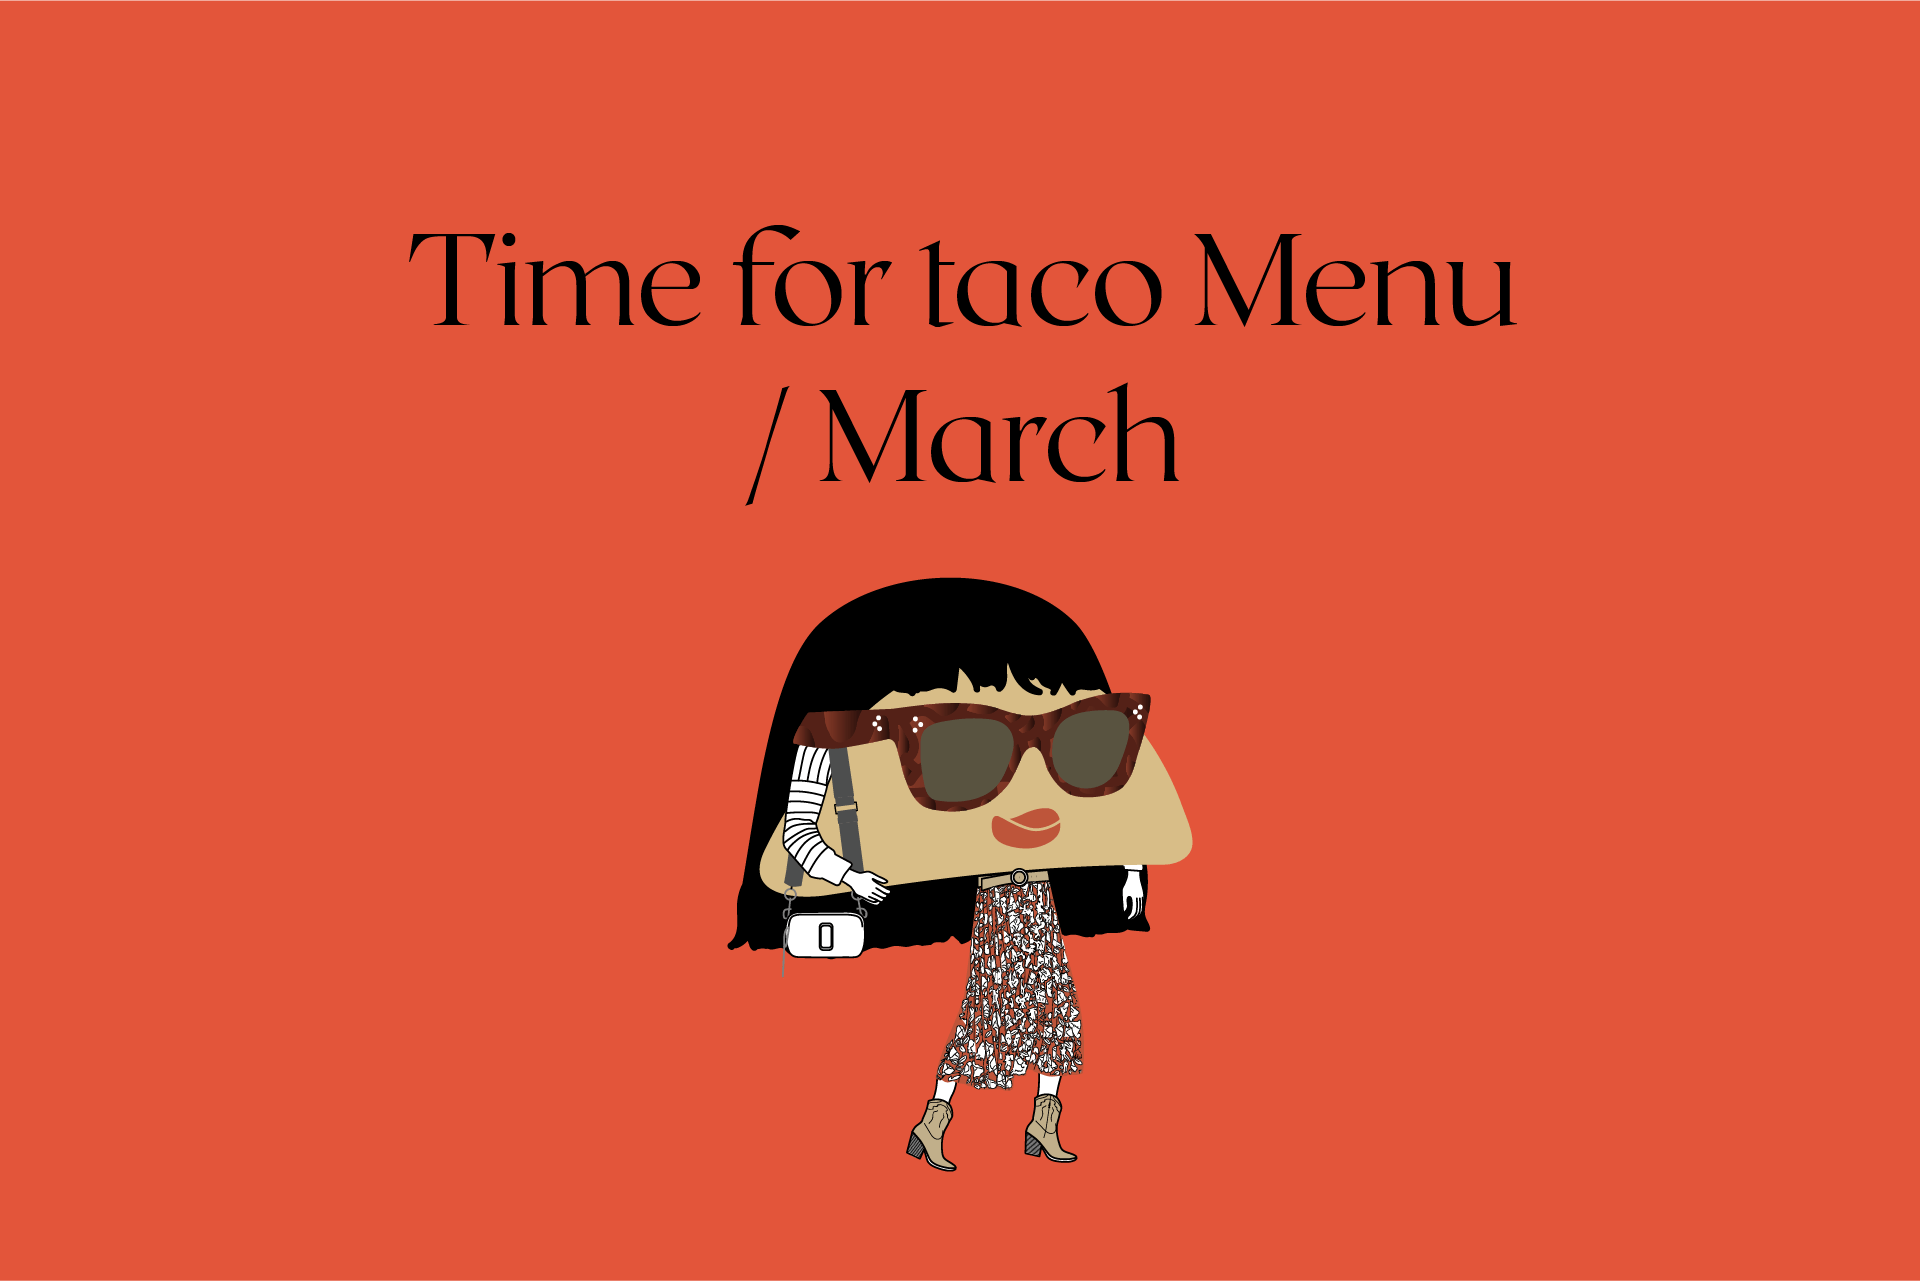 Time for taco Menu / March